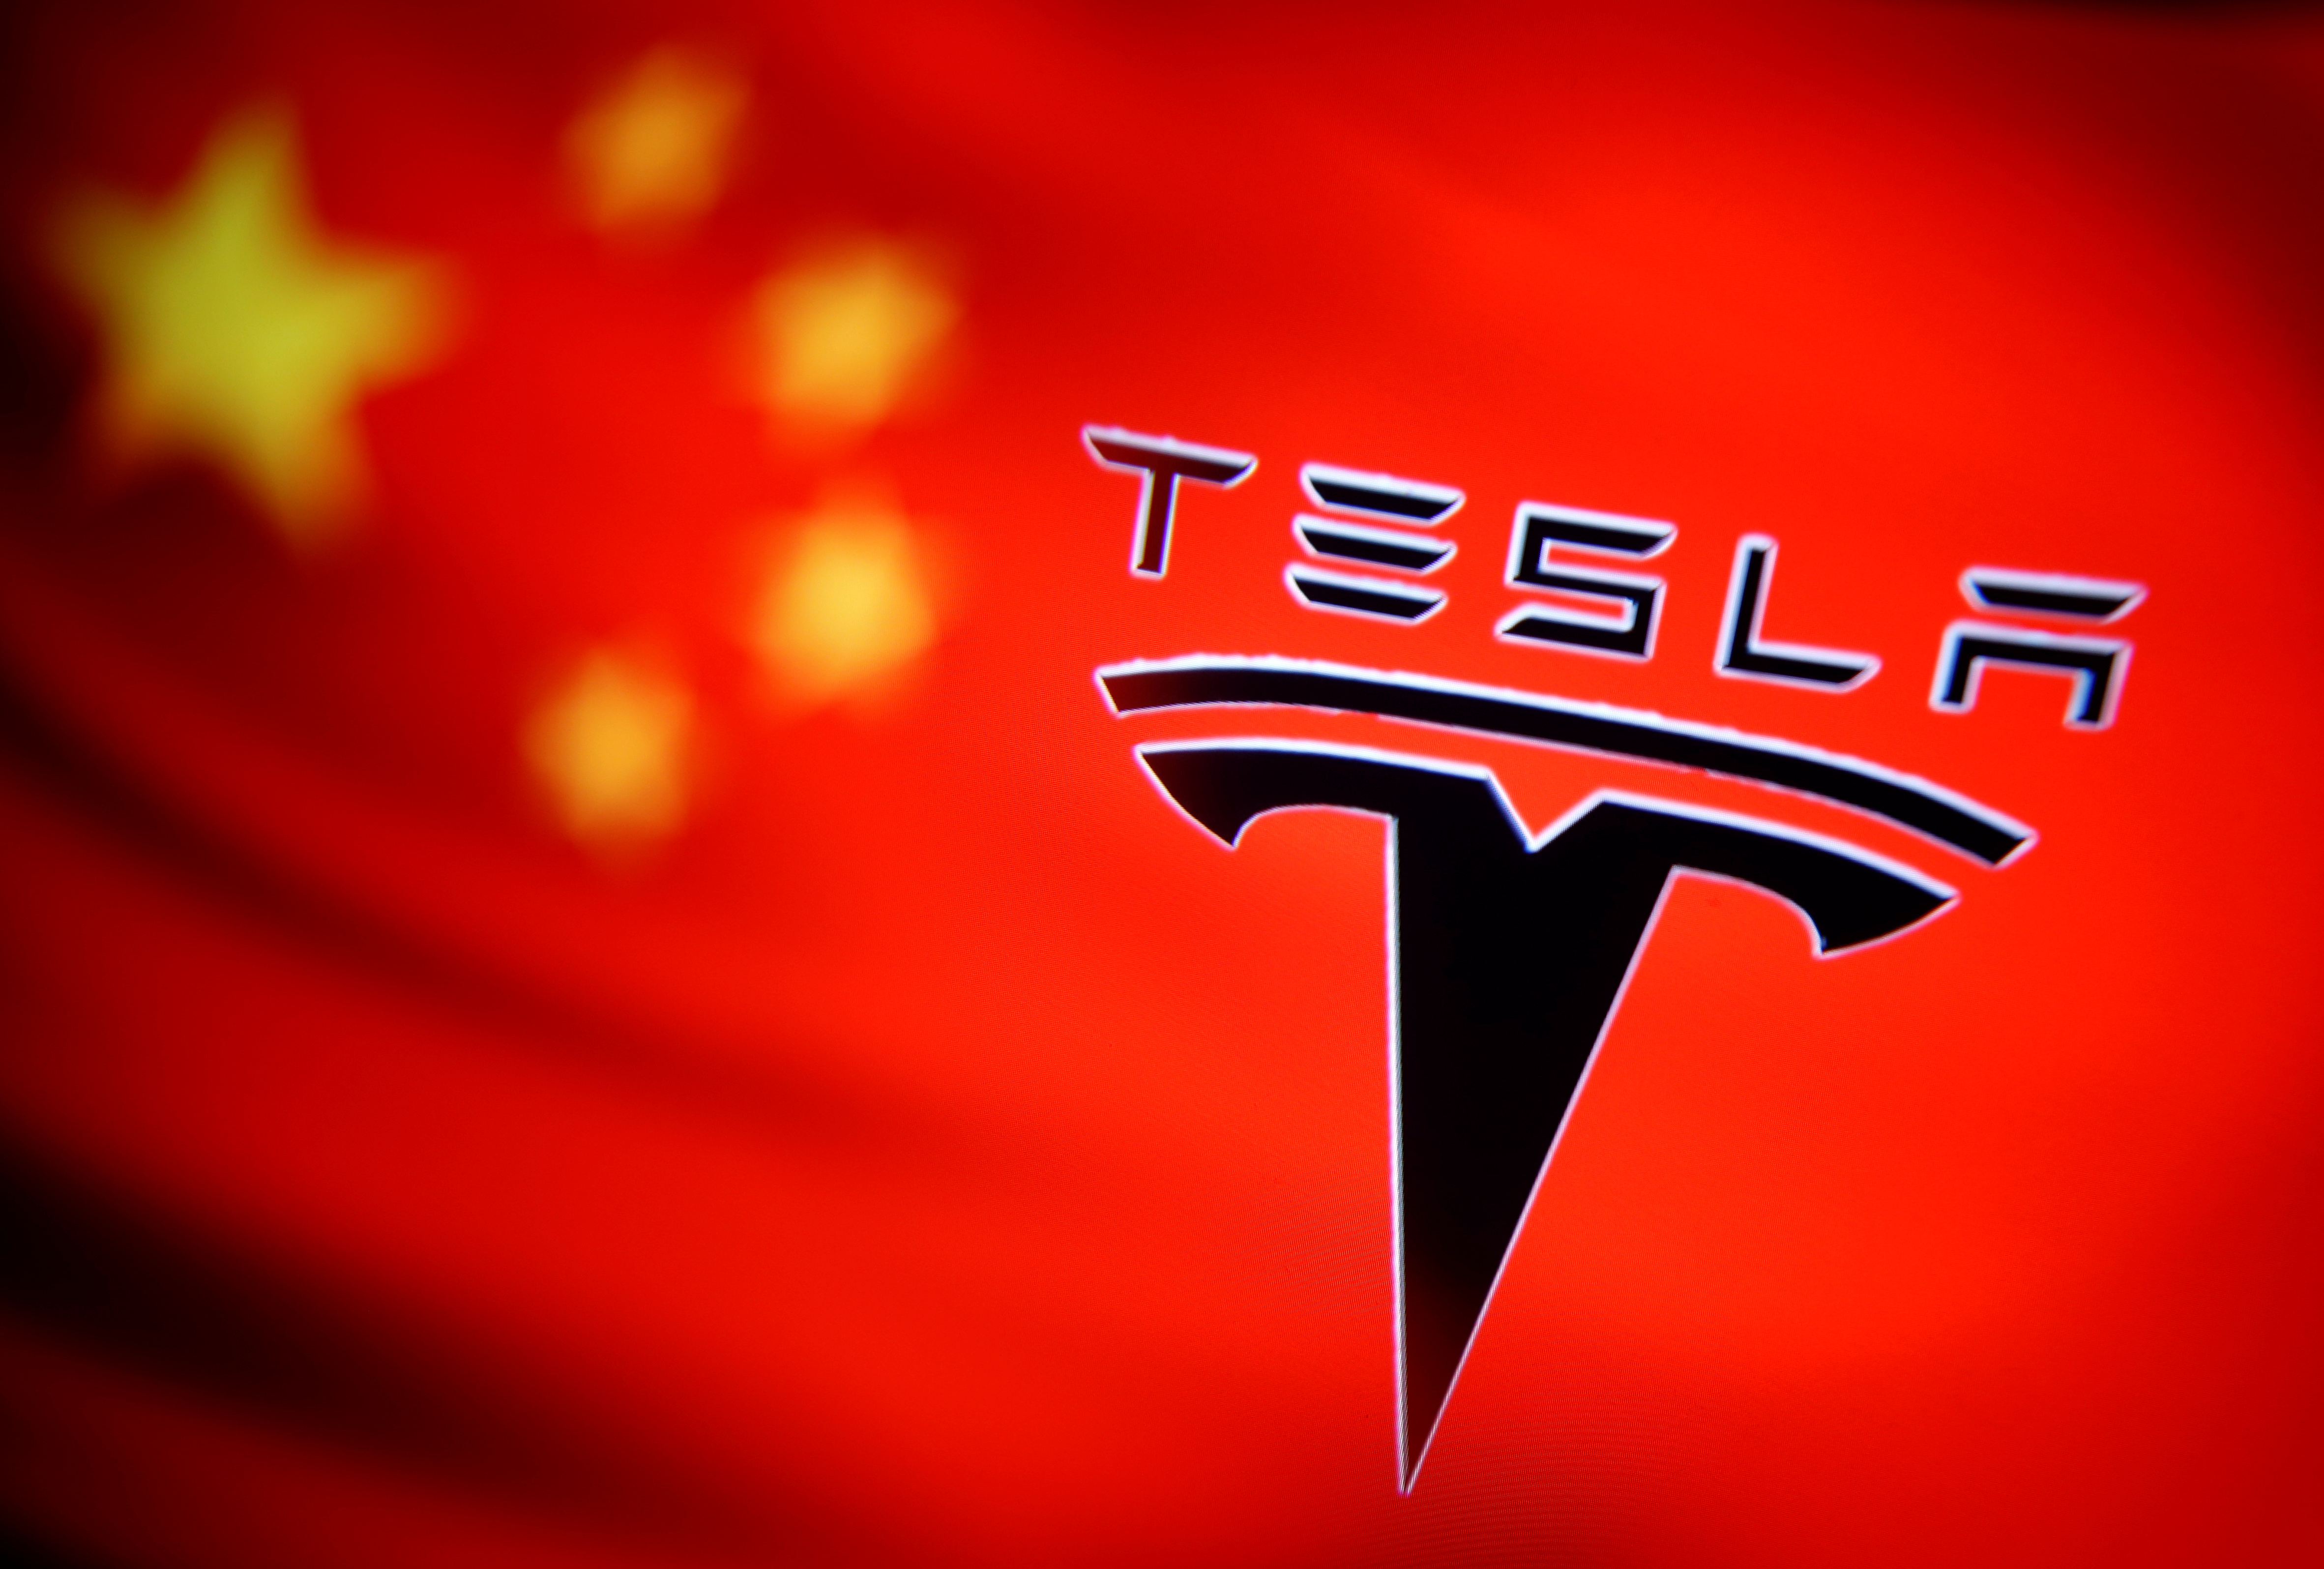 Chinese flag and Tesla logo is seen through a magnifier in this illustration taken January 7, 2021. REUTERS/Dado Ruvic